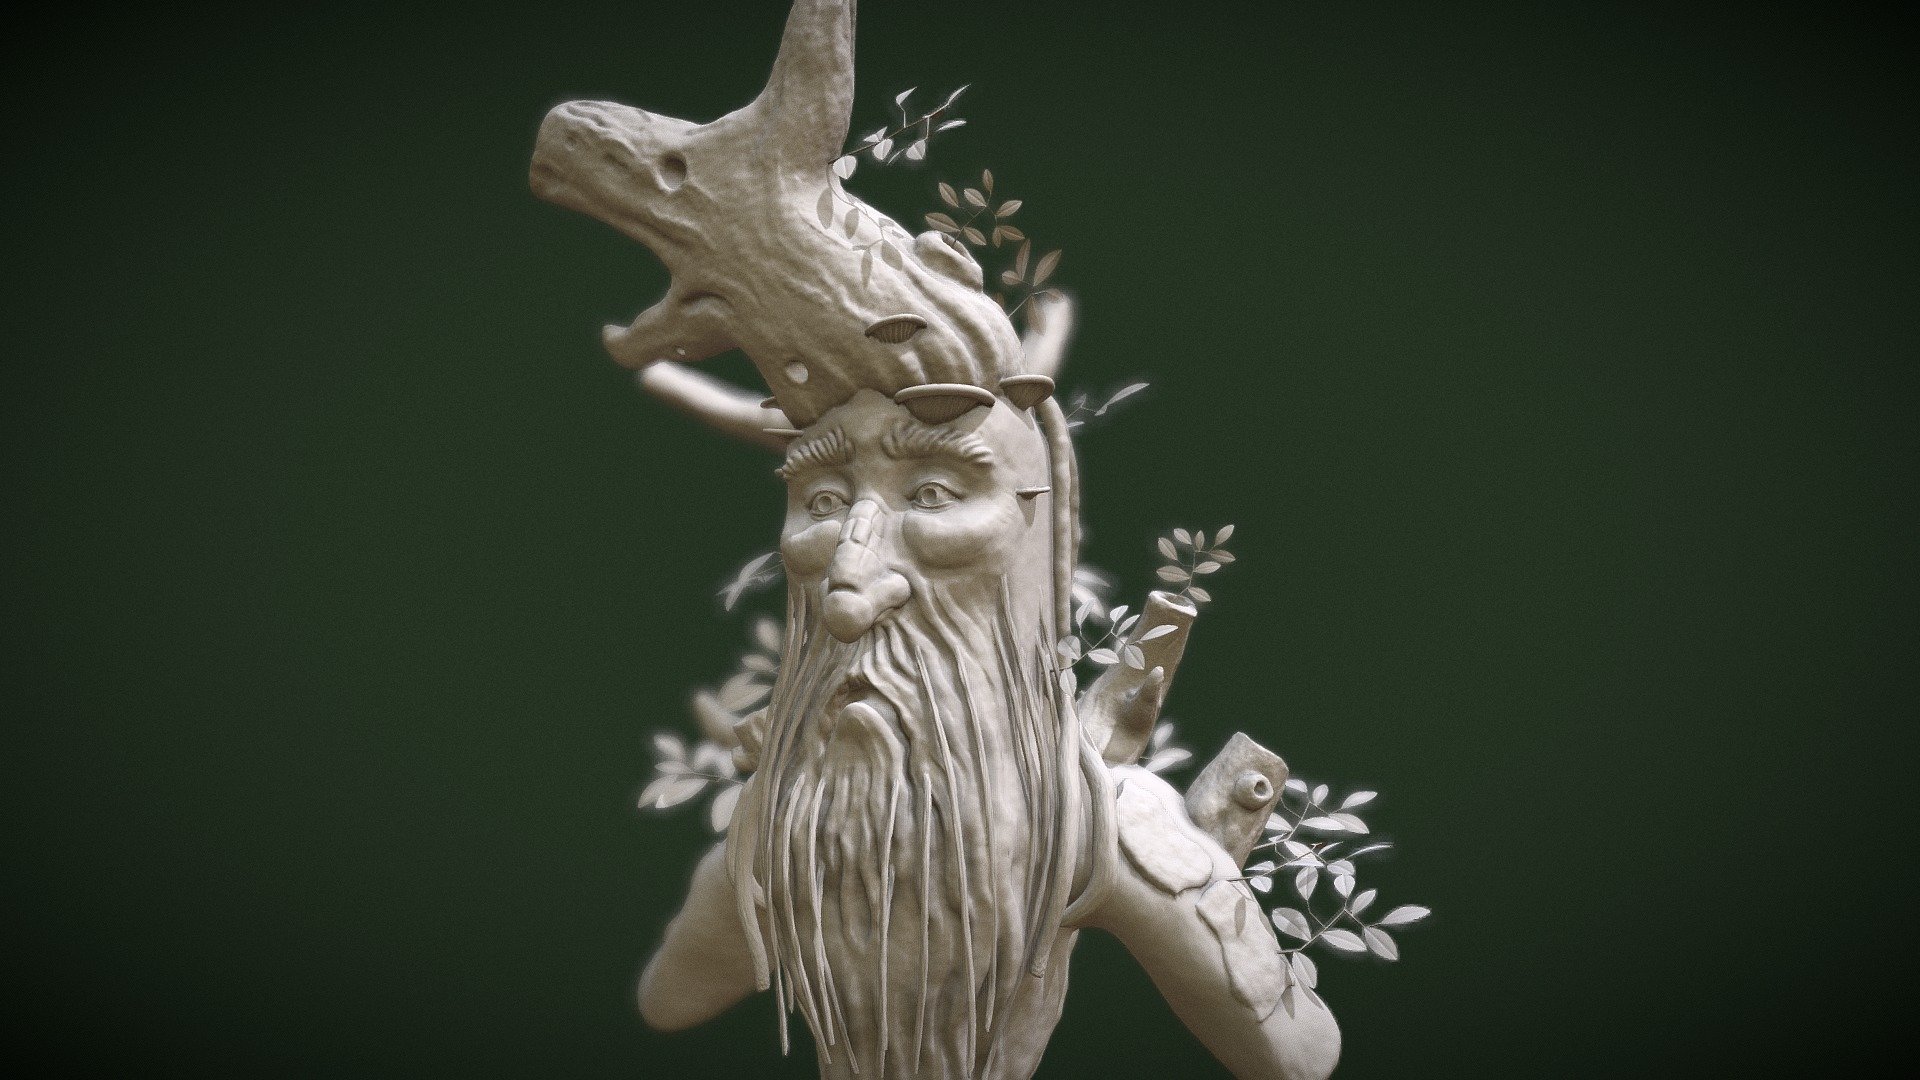 Day 28 of sculpt january 2021! This is supposed to be Tree Beard the Ent from Lord Of The Rings.


sculptjanuary

sculptjanuary2021 - Day 28 - Vicious Nature - Buy Royalty Free 3D model by Ryan King Art (@ryankingart) 3d model